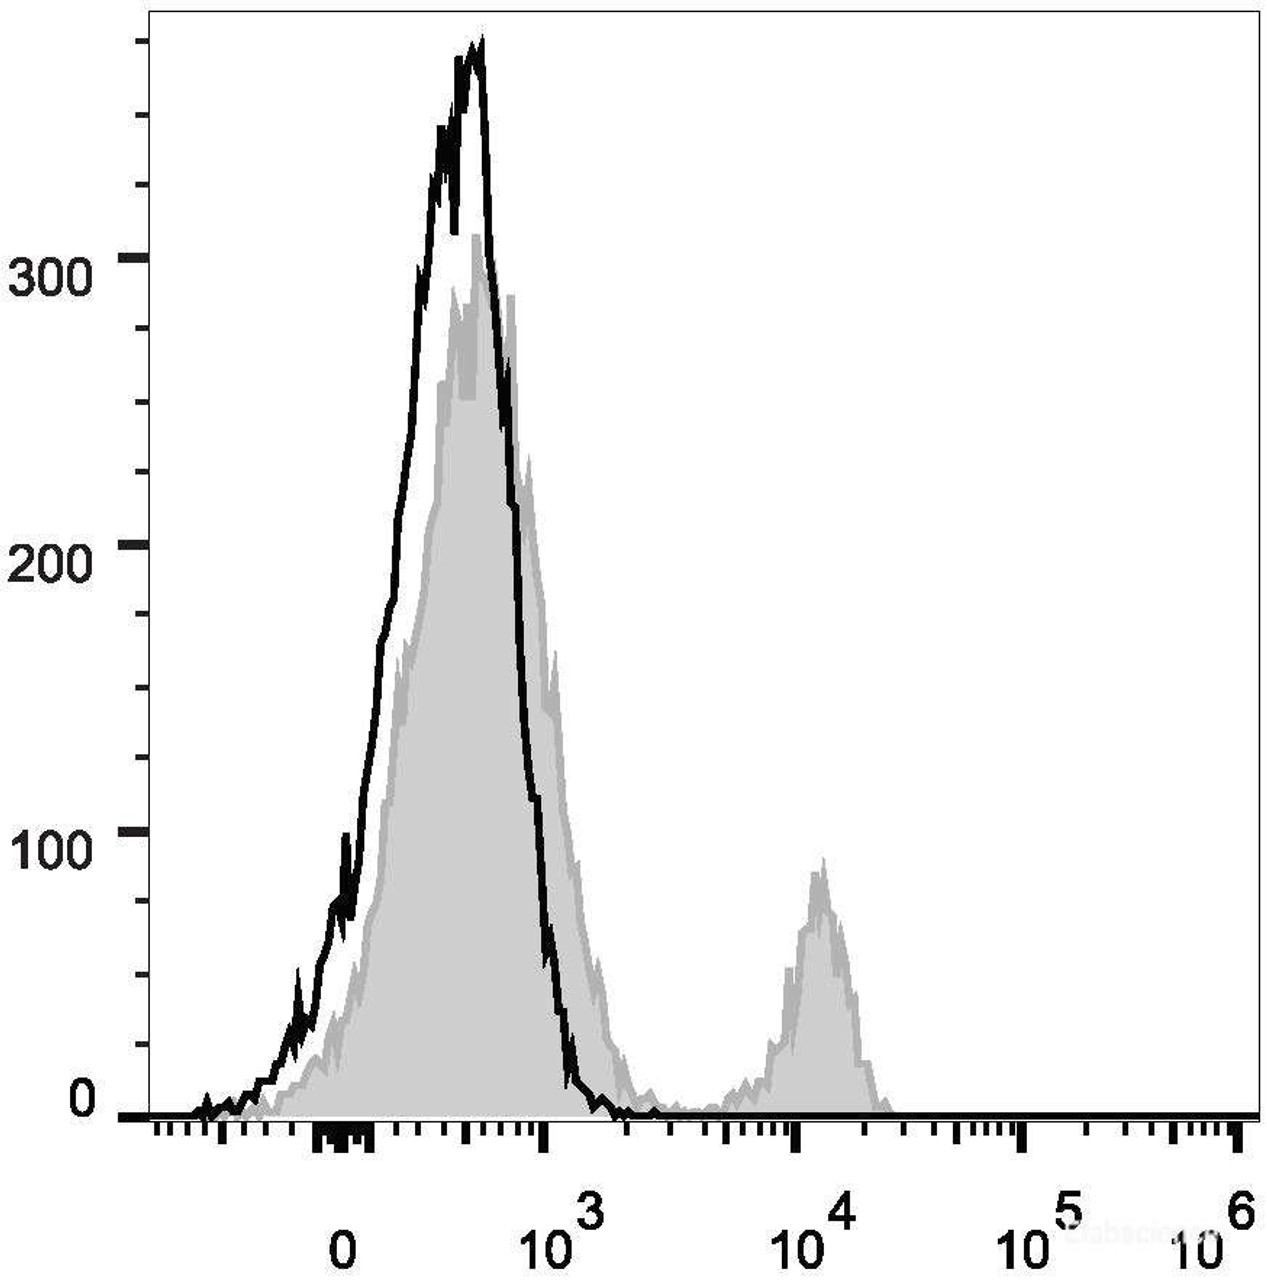 Human peripheral blood lymphocytes are stained with Anti-Human CD4 Monoclonal Antibody(AF488 Conjugated)(filled gray histogram). Unstained lymphocytes (empty black histogram) are used as control.